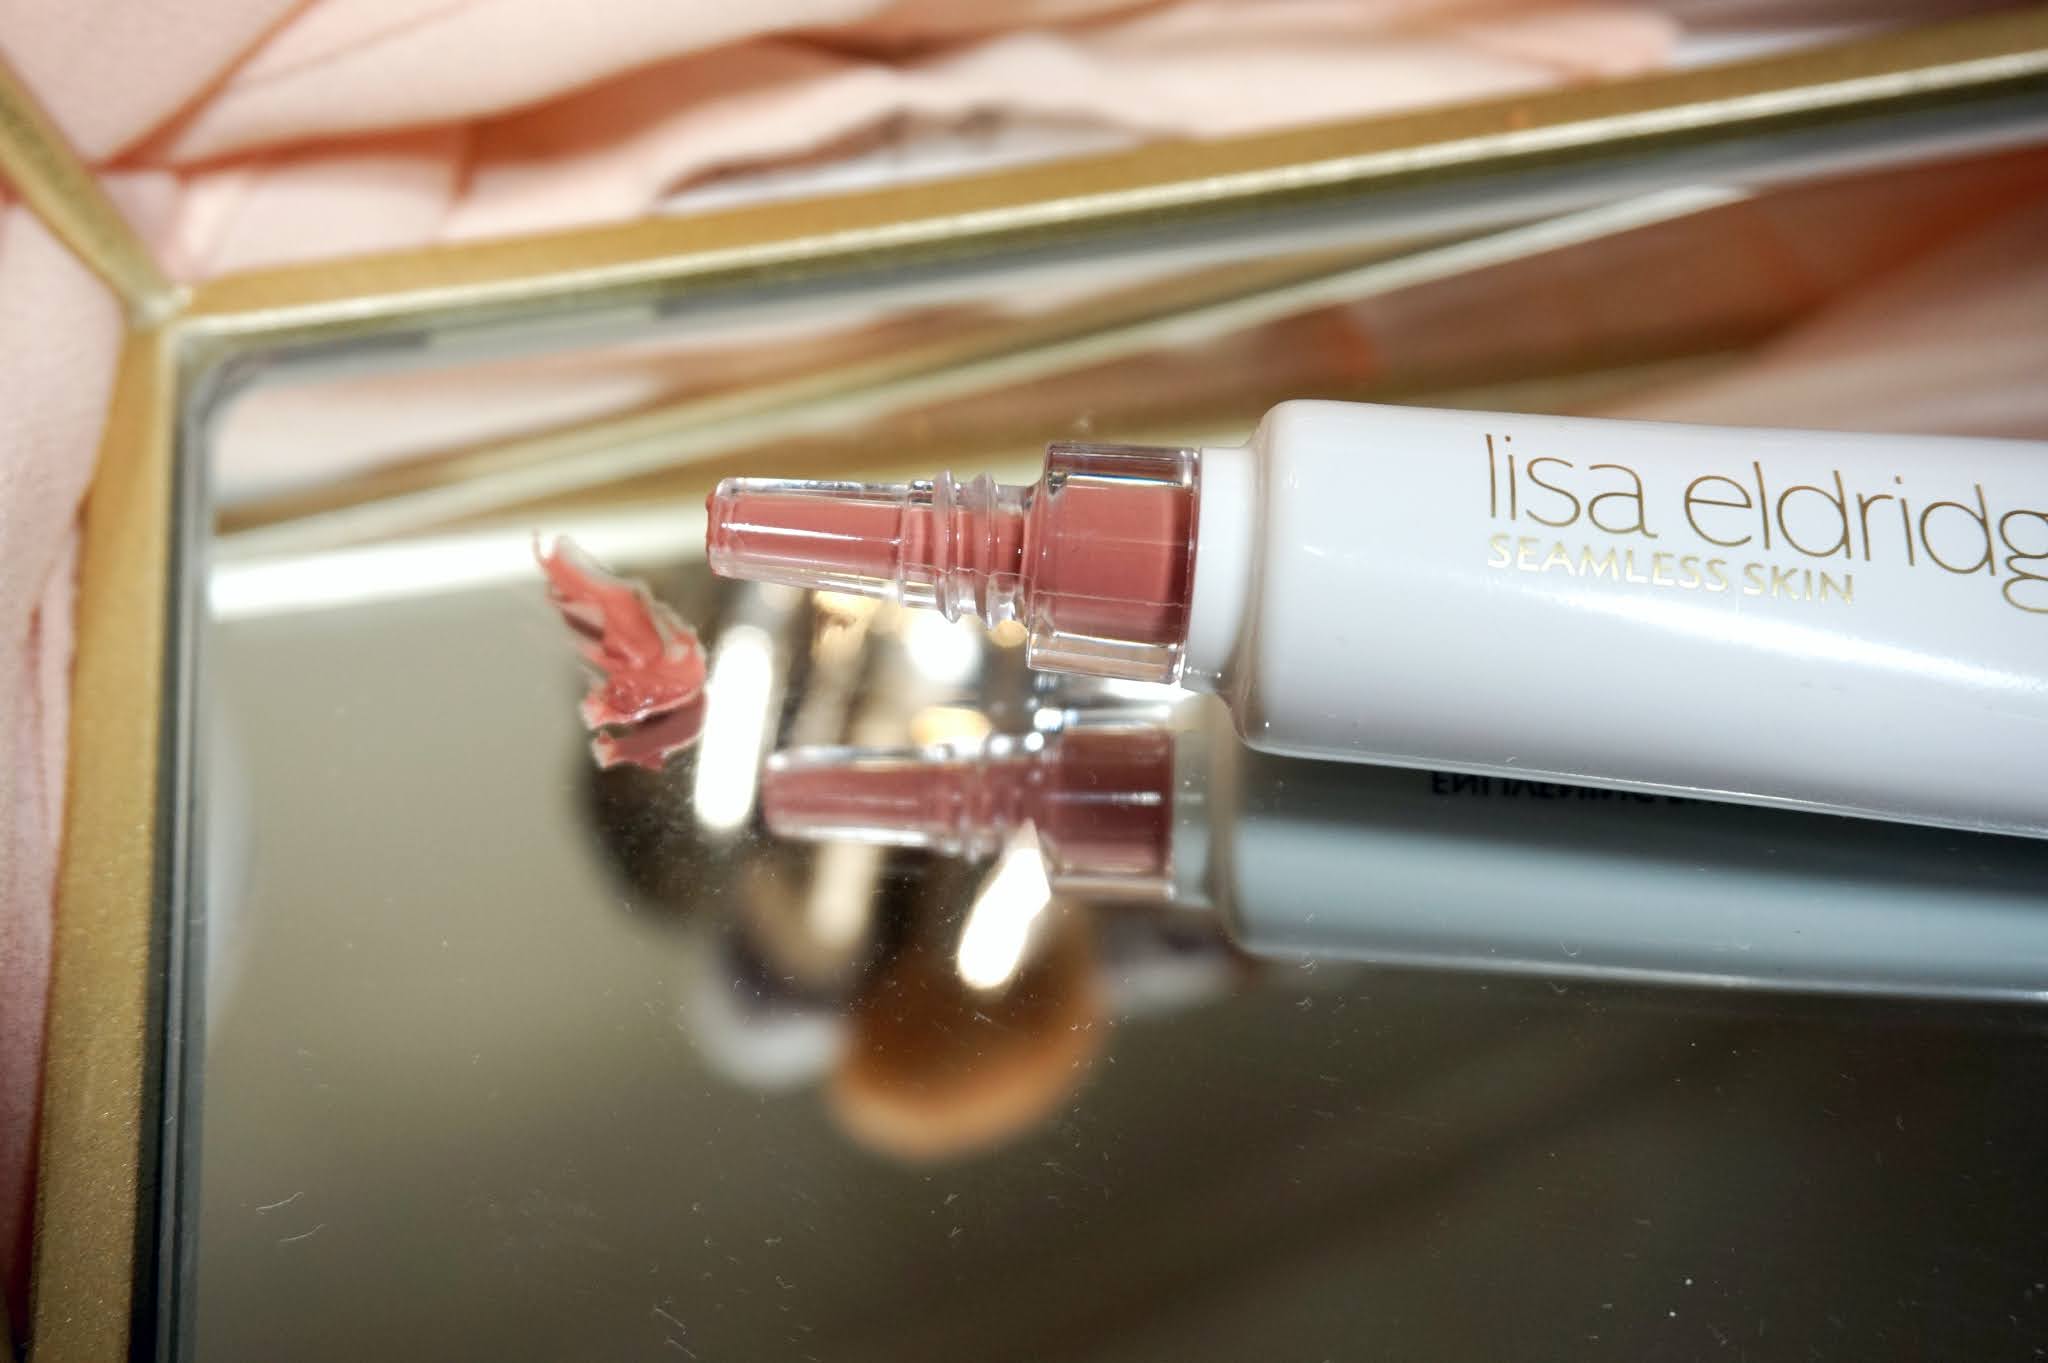 Lisa Eldridge Enlivening Blush Review and Swatches